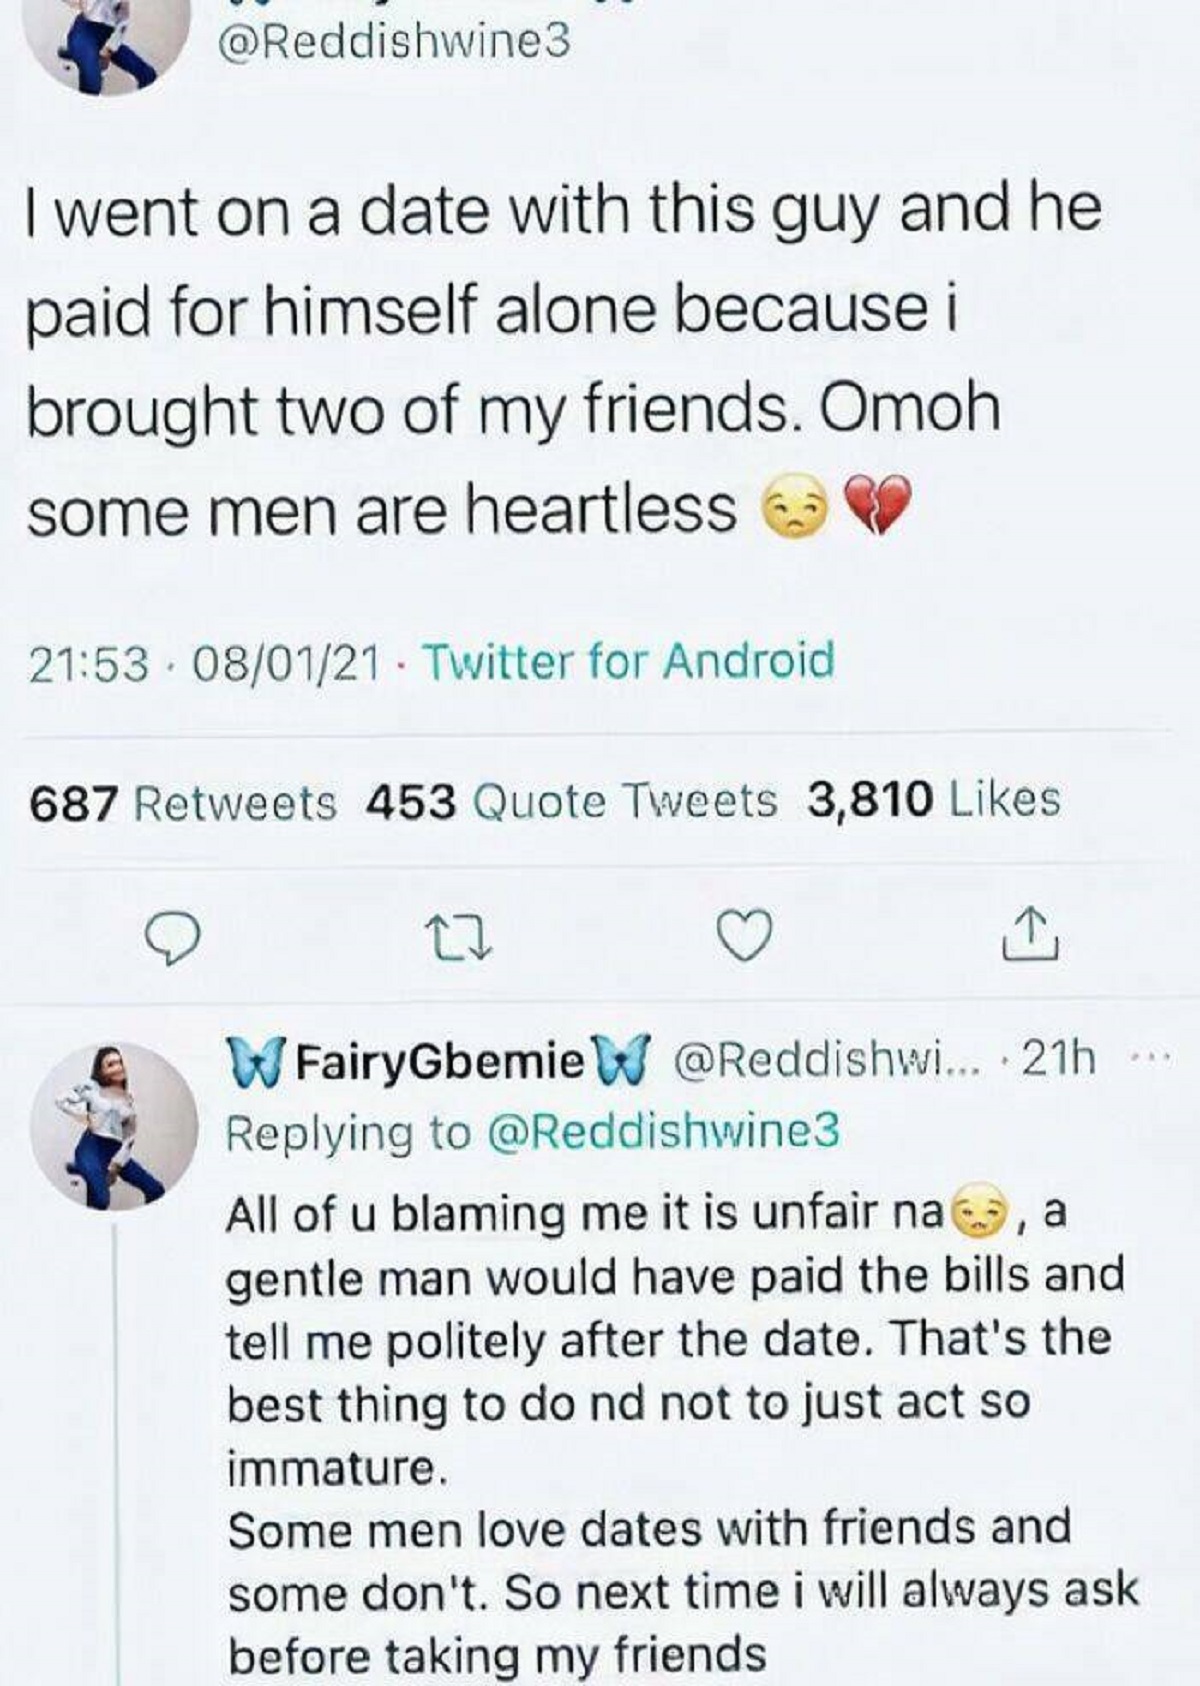 screenshot - I went on a date with this guy and he paid for himself alone because i brought two of my friends. Omoh some men are heartless 080121 Twitter for Android 687 453 Quote Tweets 3,810 WFairyGbemie W ... 21h All of u blaming me it is unfair na, a 